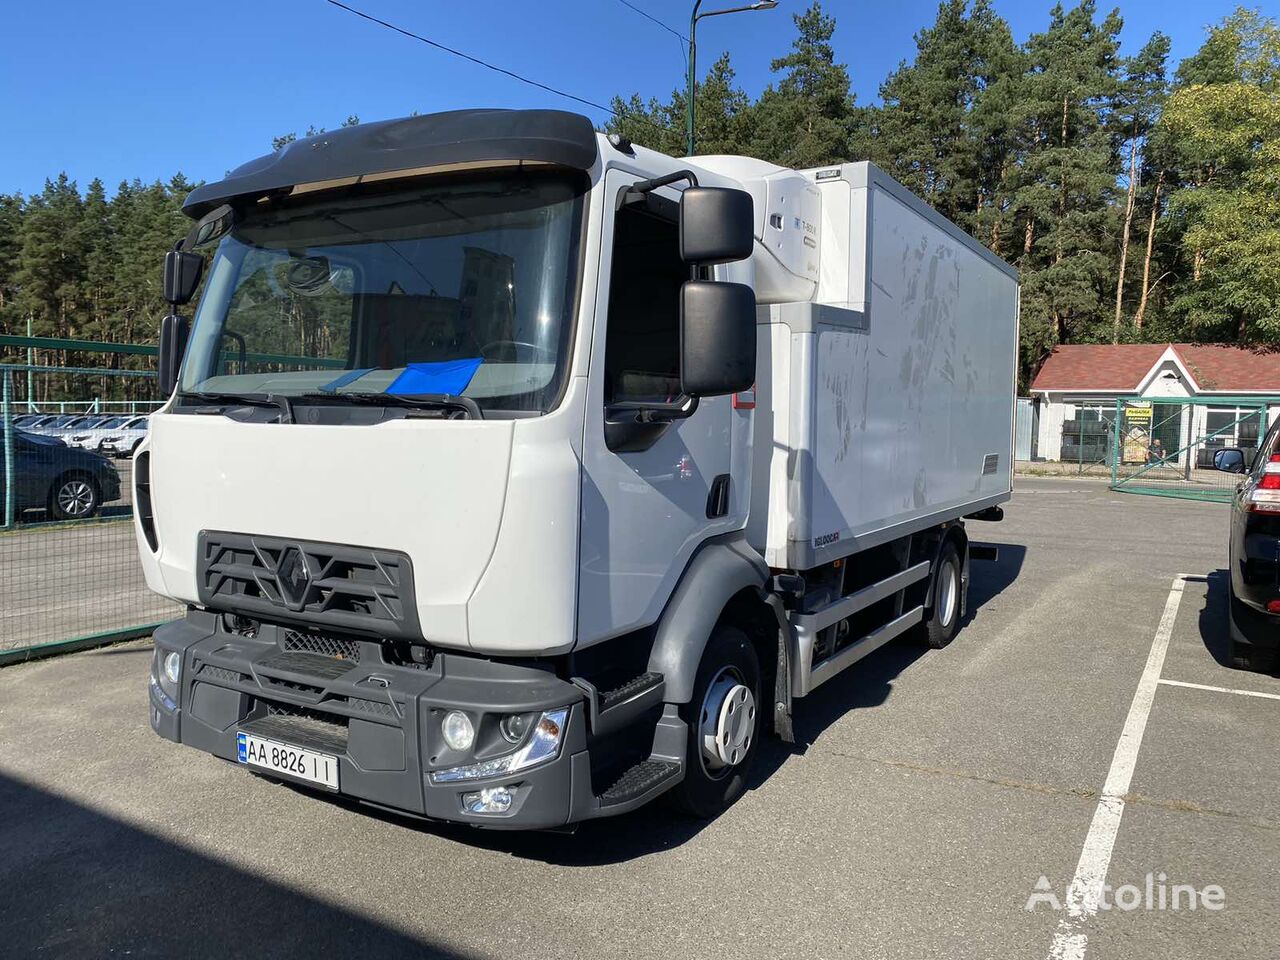 Renault D12 refrigerated truck